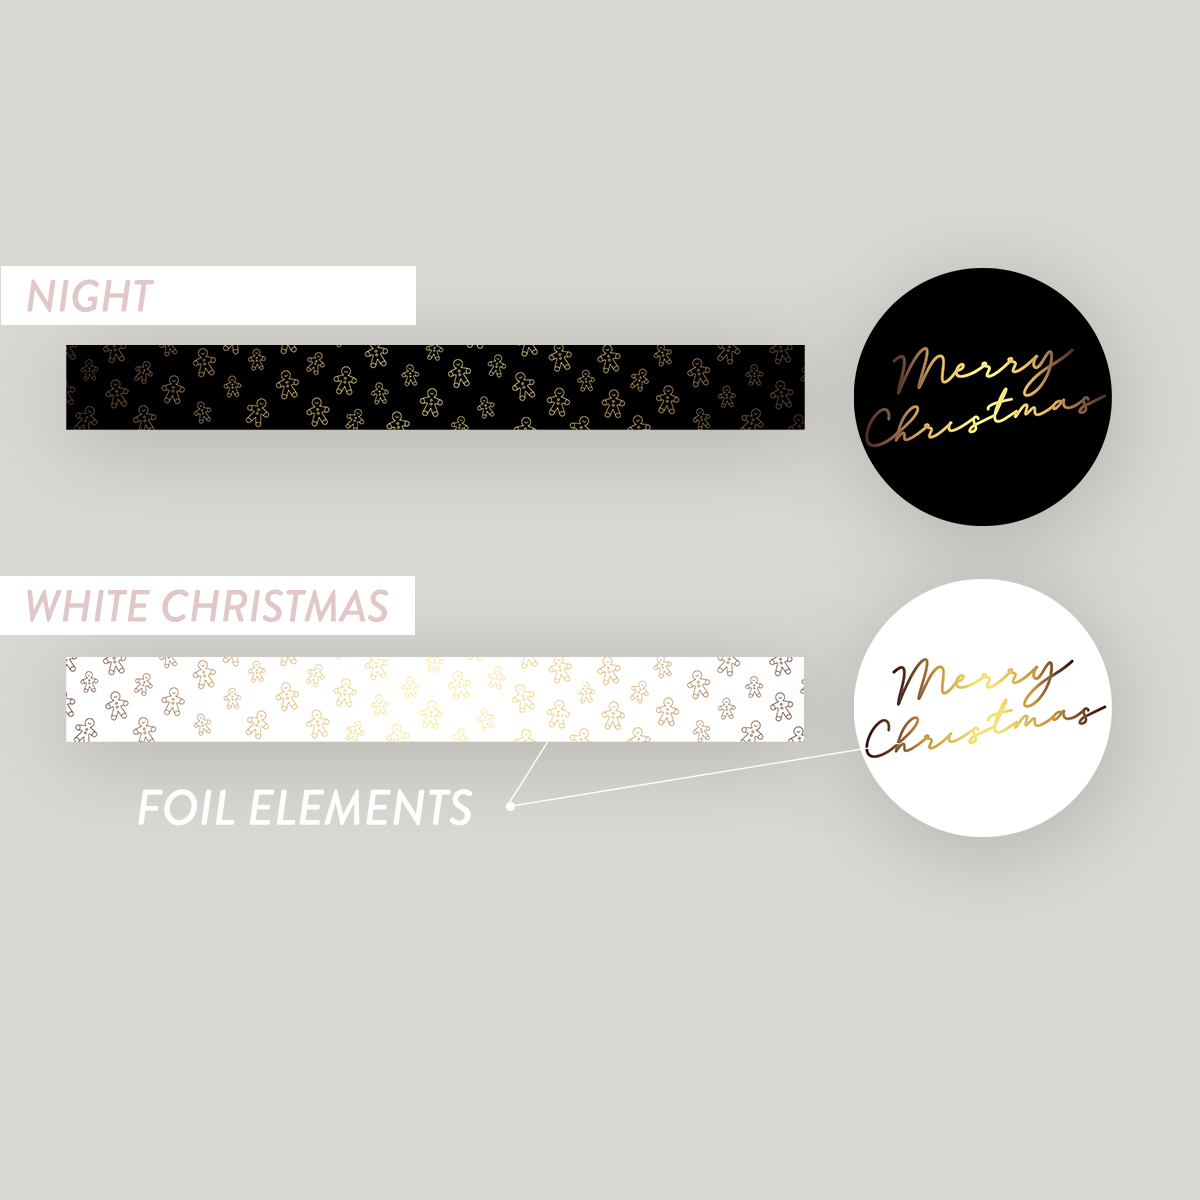 FOILED The Jewel Christmas Collection Gingerbread Men Travel Tin Set (Lid and Wrap Label) Monochrome